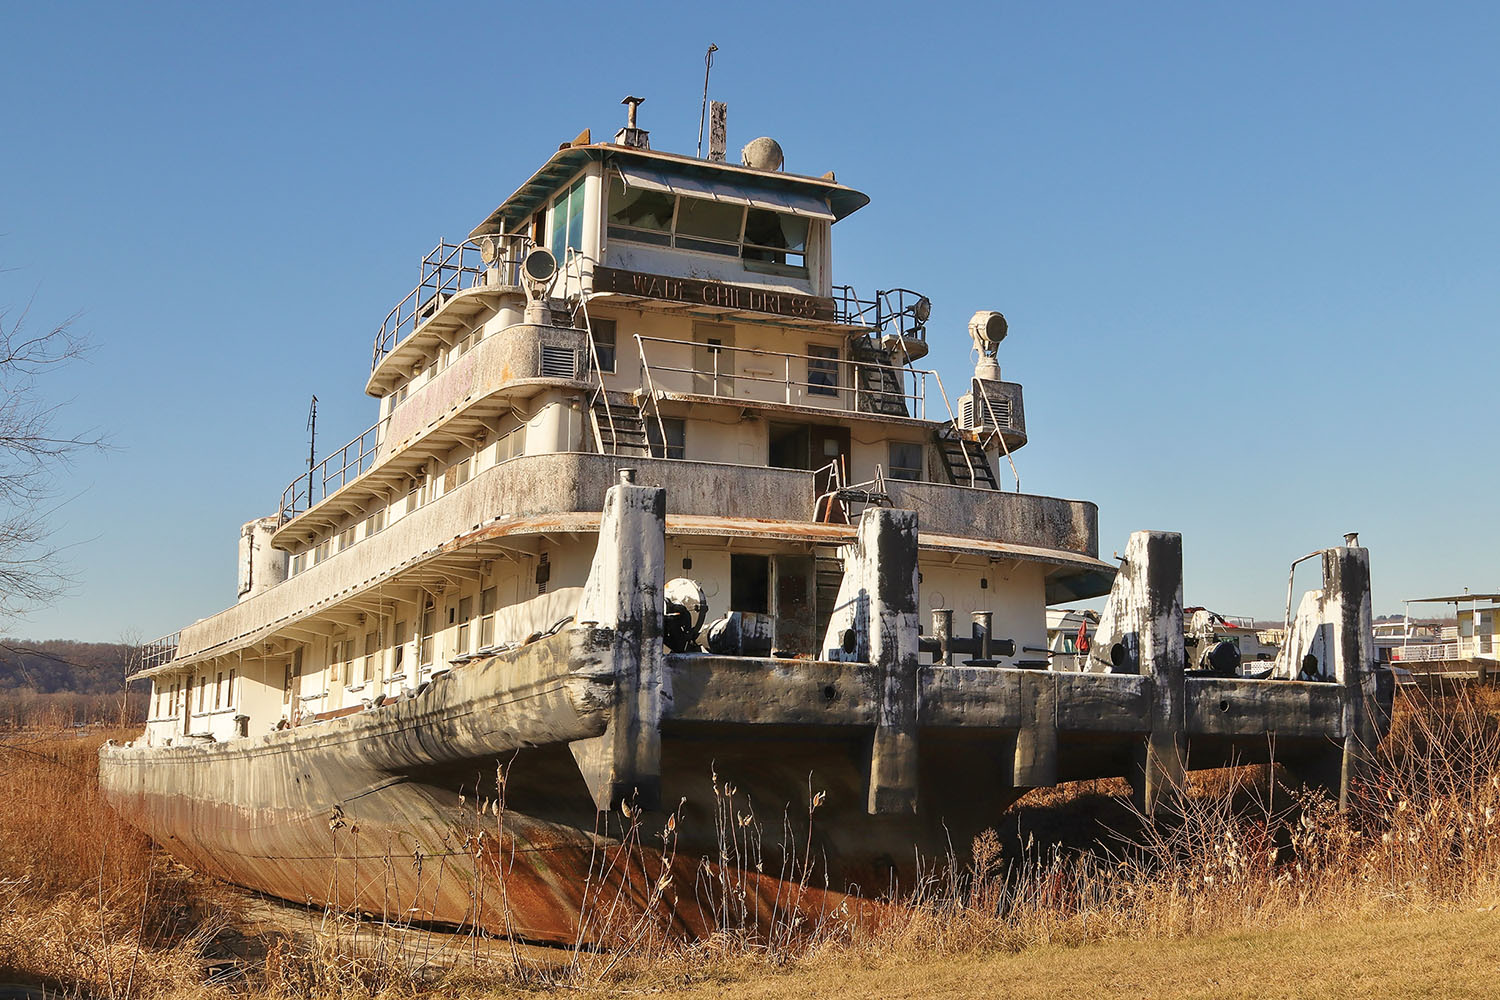 The mv. L. Wade Childress today sits high and dry at Prairie du Chein, Wis. (Photo by John Miller)